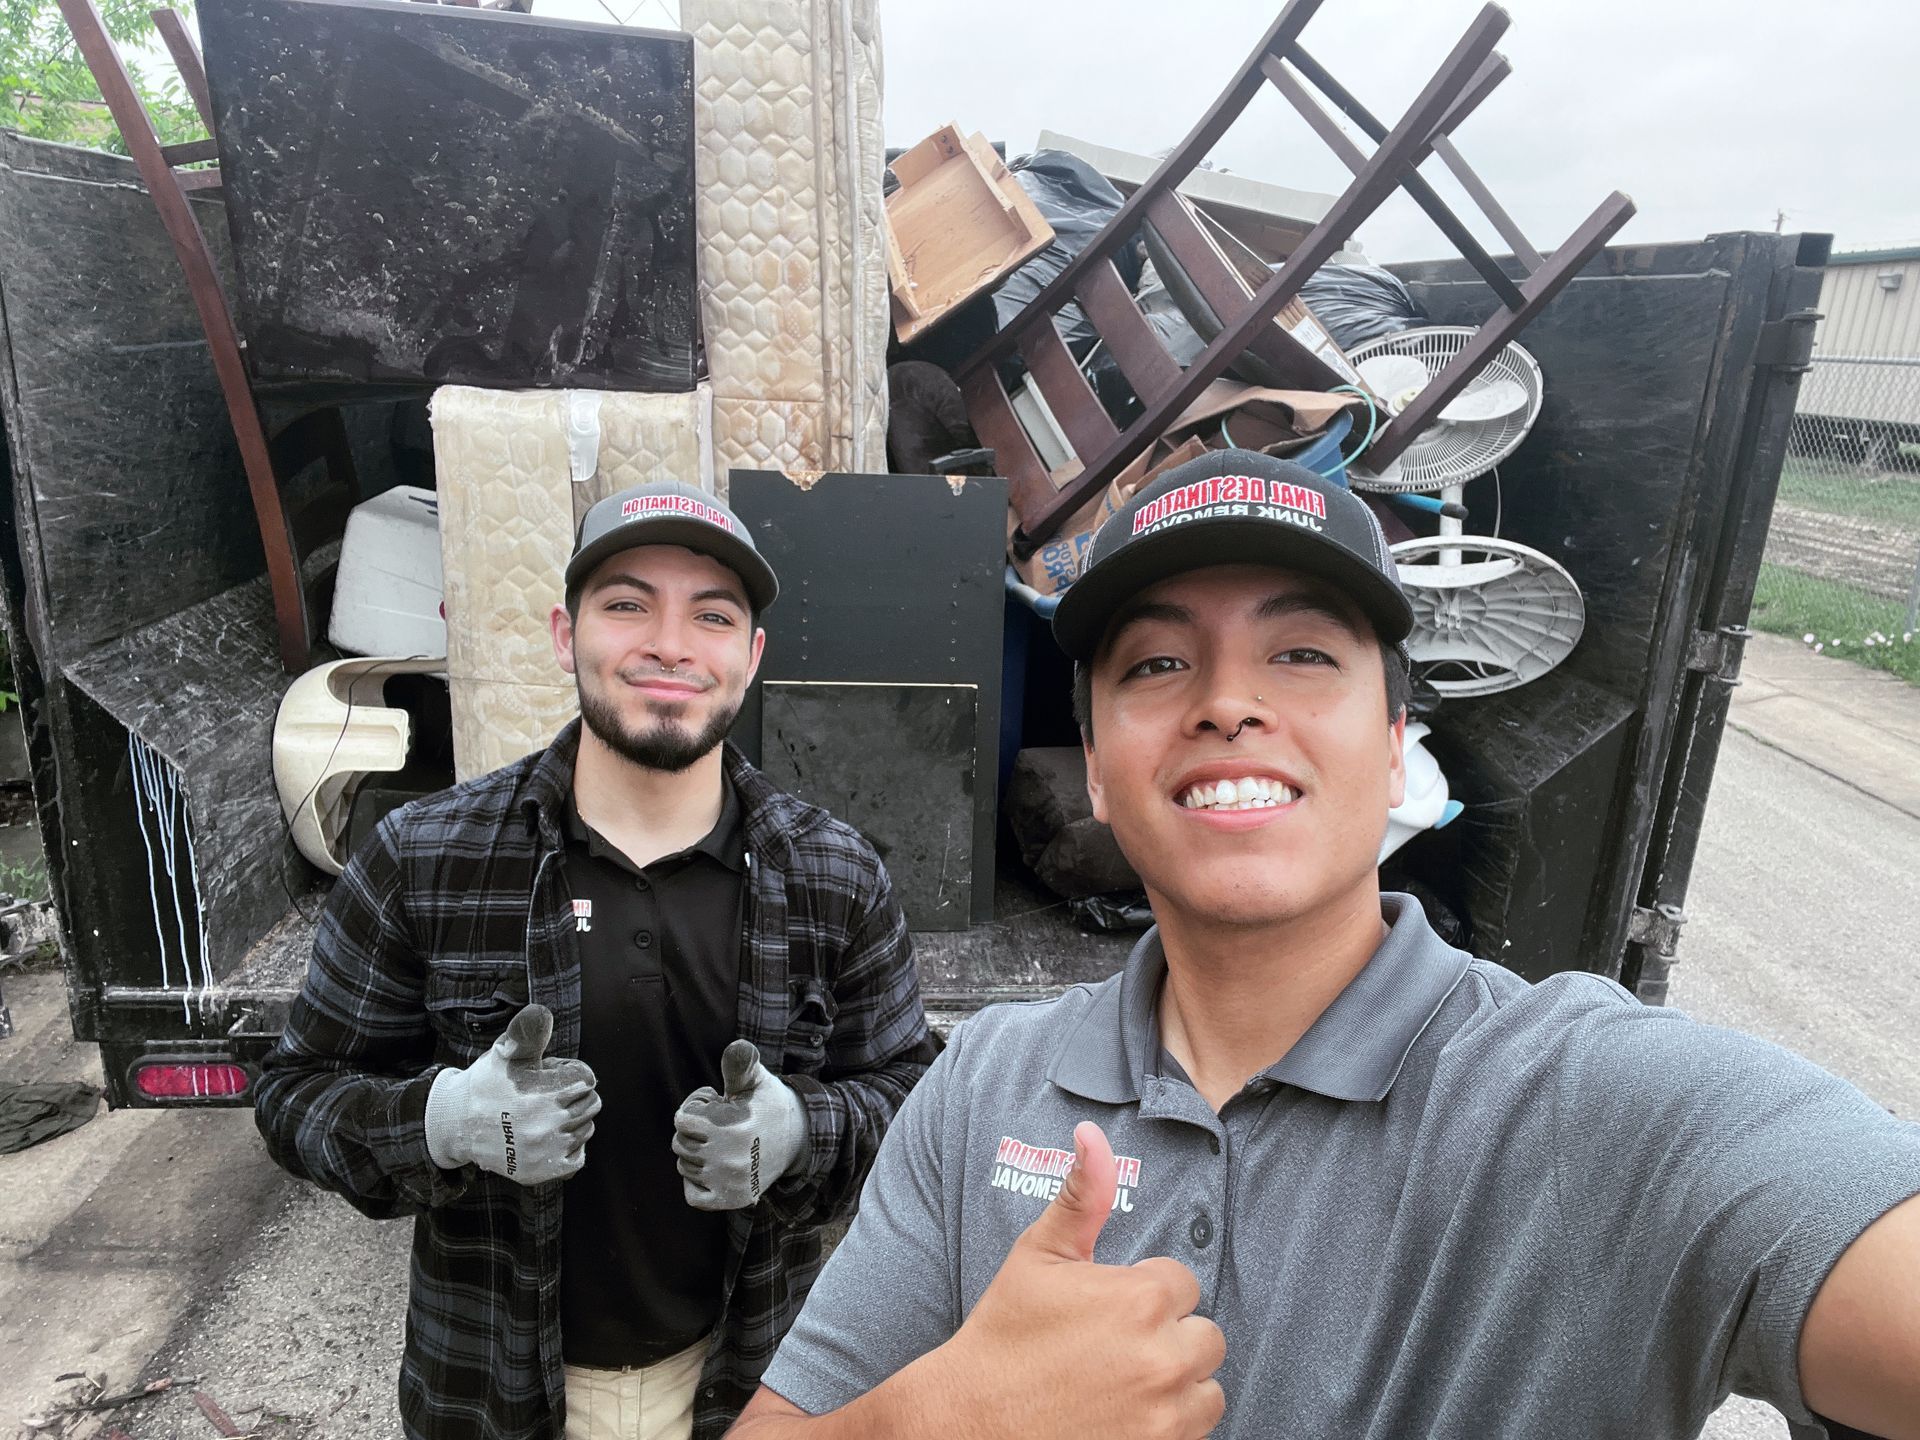 Trying to get rid of junk in Alamo Heights? Call your local junk experts - Final Destination! Our licensed and professional junk haulers can get rid of your items with same-day service. What kind of junk do we take in Alamo Heights? We can haul furniutre, debris, yard waste, household items and more.